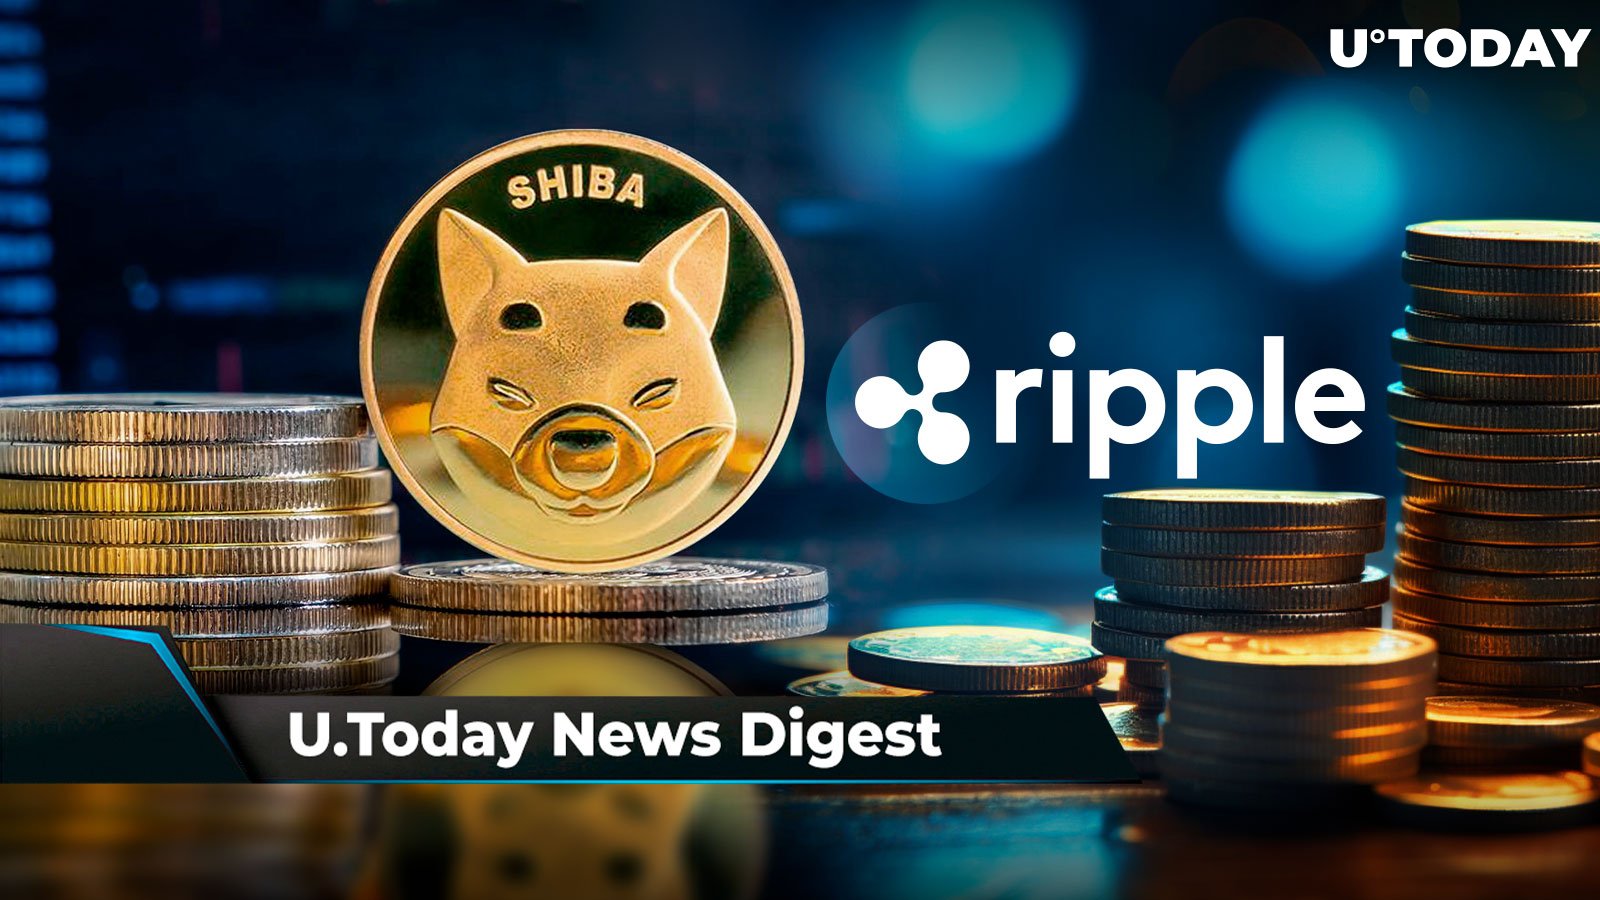 1.75 Trillion SHIB Mysteriously Seized on Robinhood, Ripple's 800 Million XRP Escrow Lock Failed to Reset Price, Peter Schiff Named New Bearish Target for BTC: U.Today's Crypto News Digest